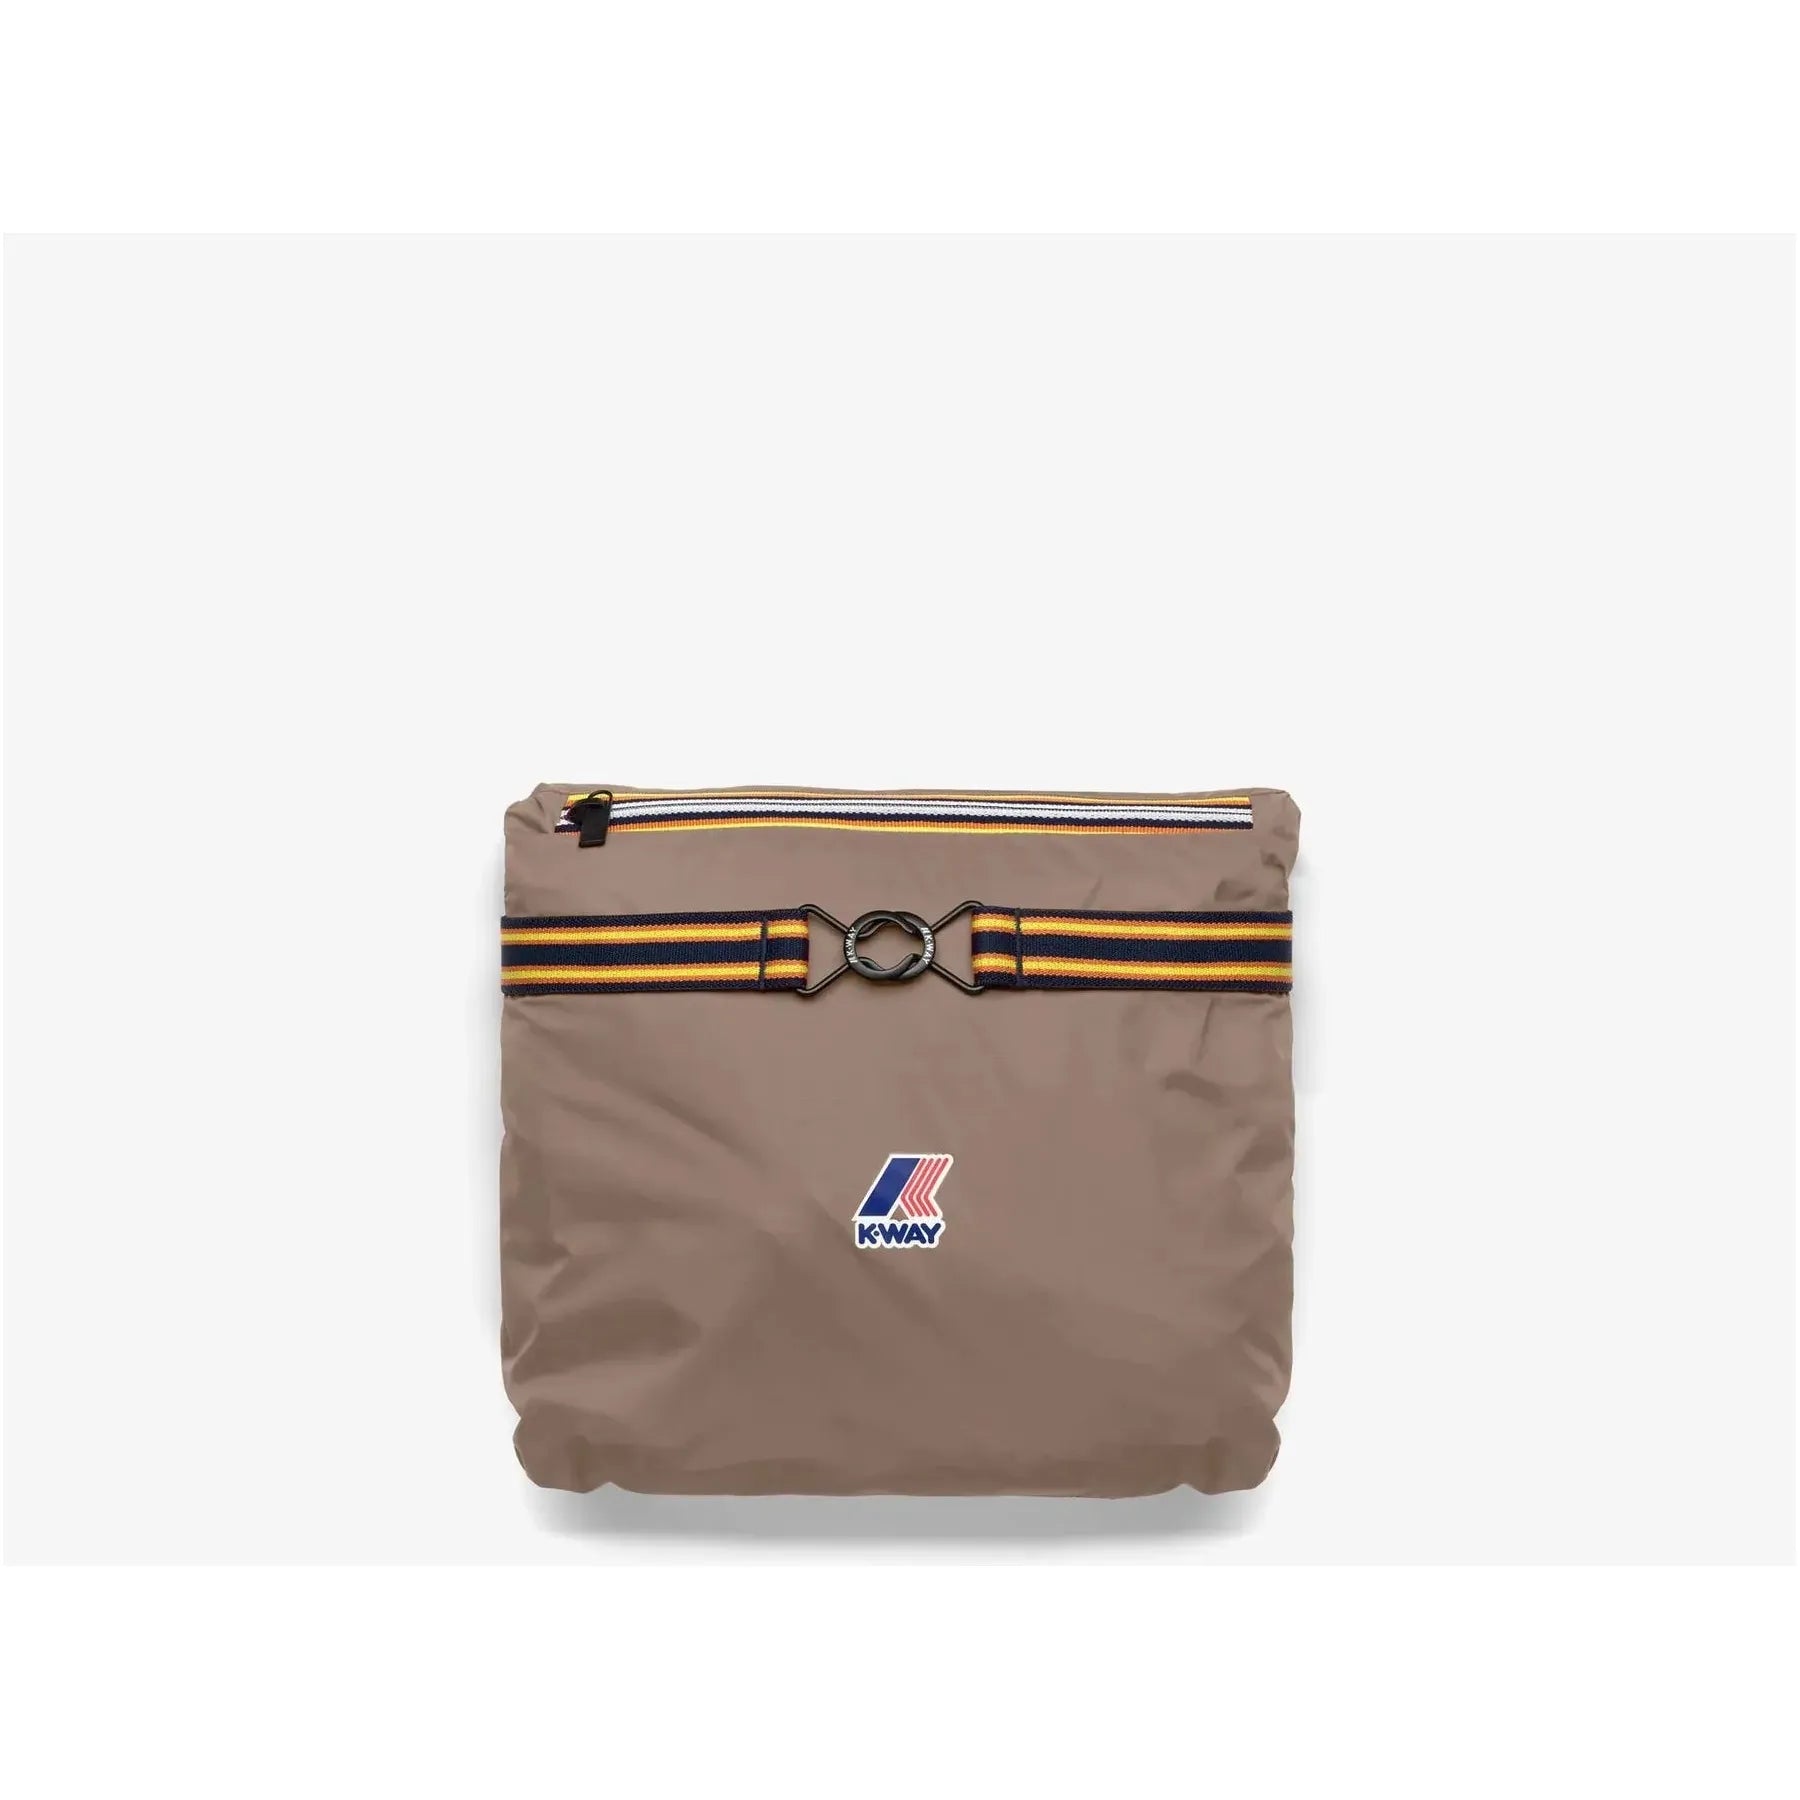 A Le Vrai 3.0 Rennes brown waterproof crossbody bag with a blue and yellow stripe, featuring a circular metal buckle and a logo on the bottom right.